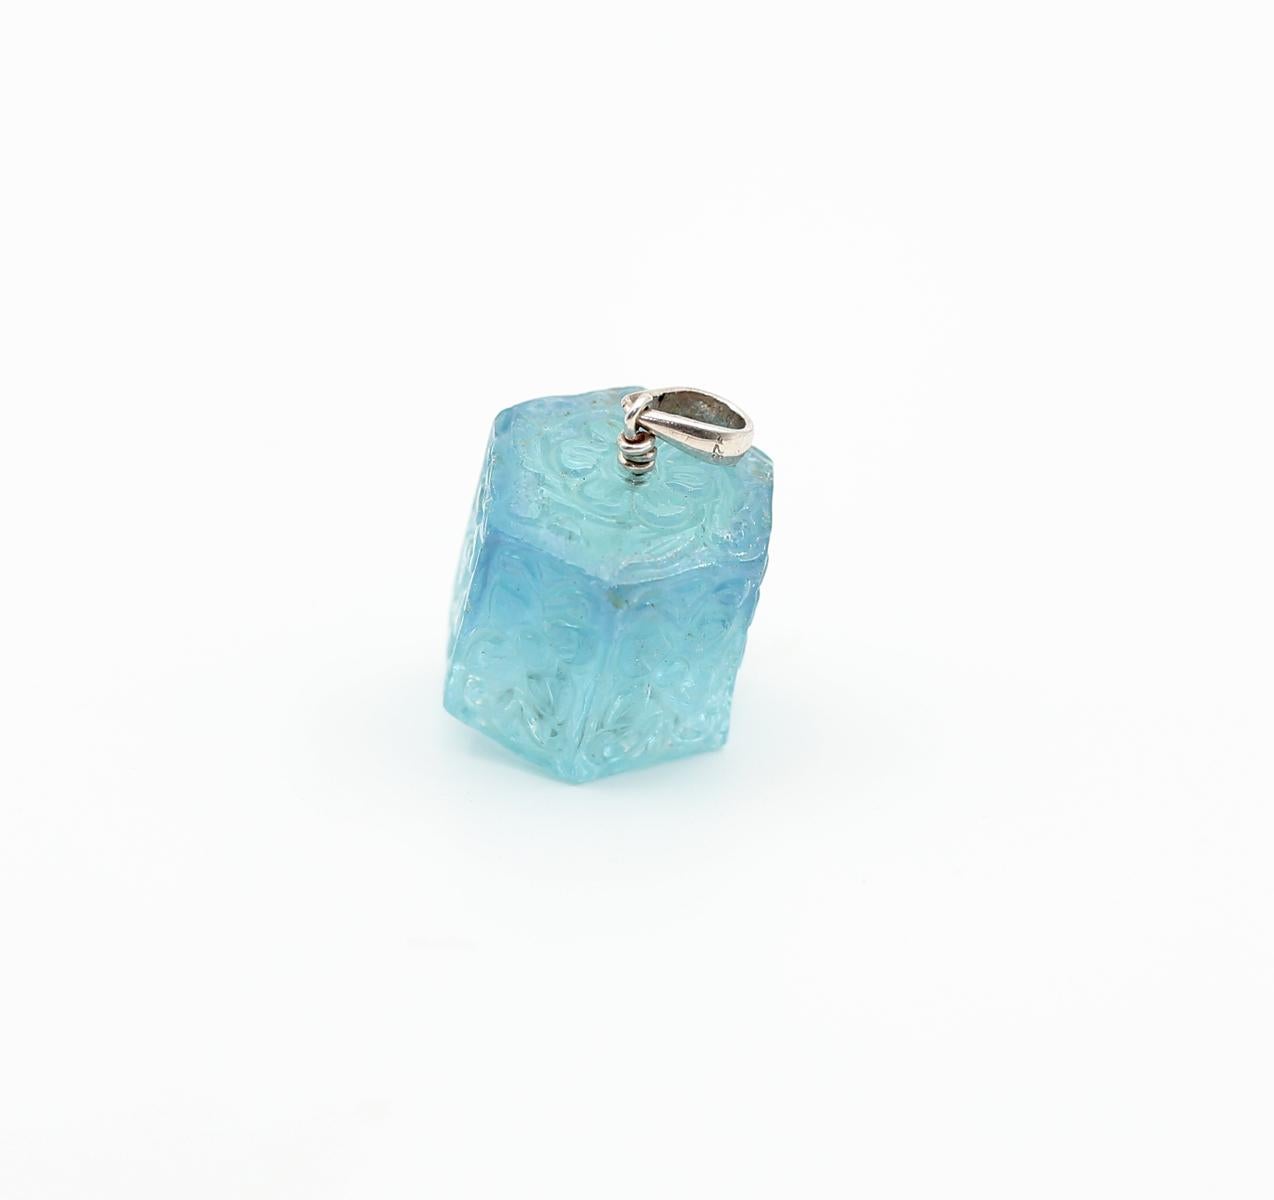 Flower Carved Aquamarine Pendant, 1980
A massive 87 Carats carved stone.
Flower Carved Aquamarine Pendant, created around 1980. A truly massive and fine carved Aquamarine stone pendant. This pendant gives freedom of choosing the outfit style. It can